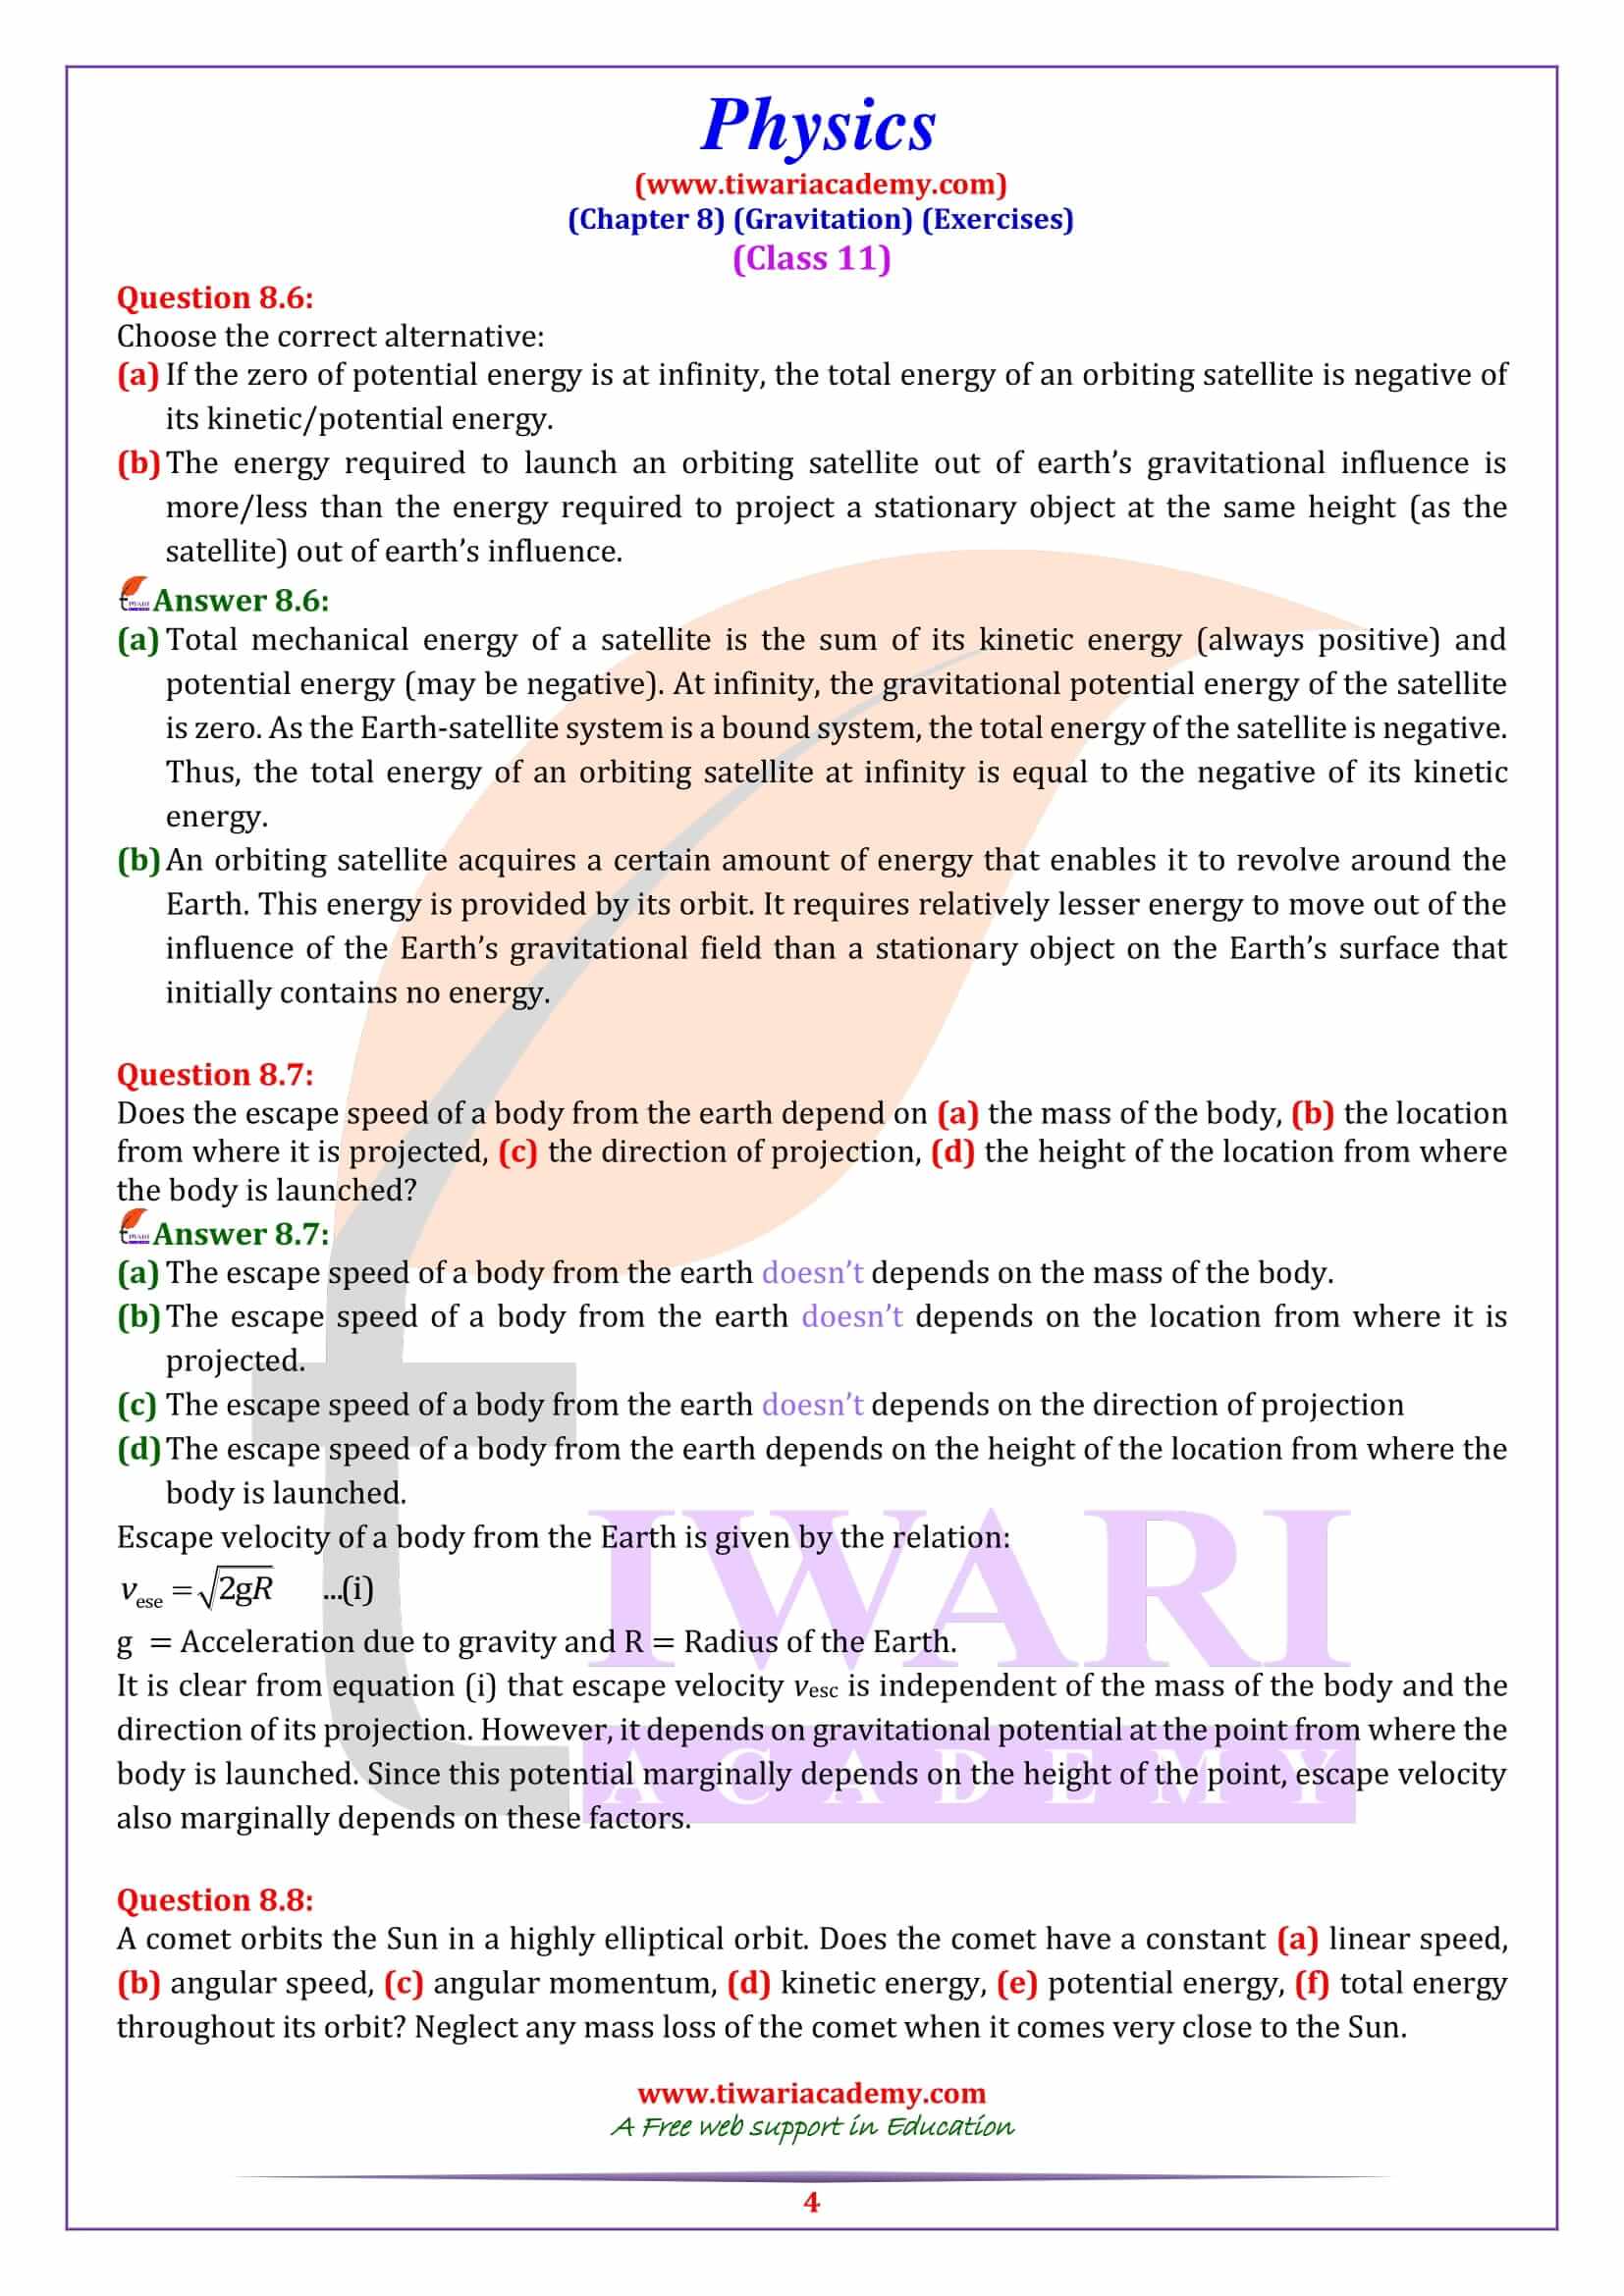 NCERT Solutions for Class 11 Physics Chapter 8 in PDF file format